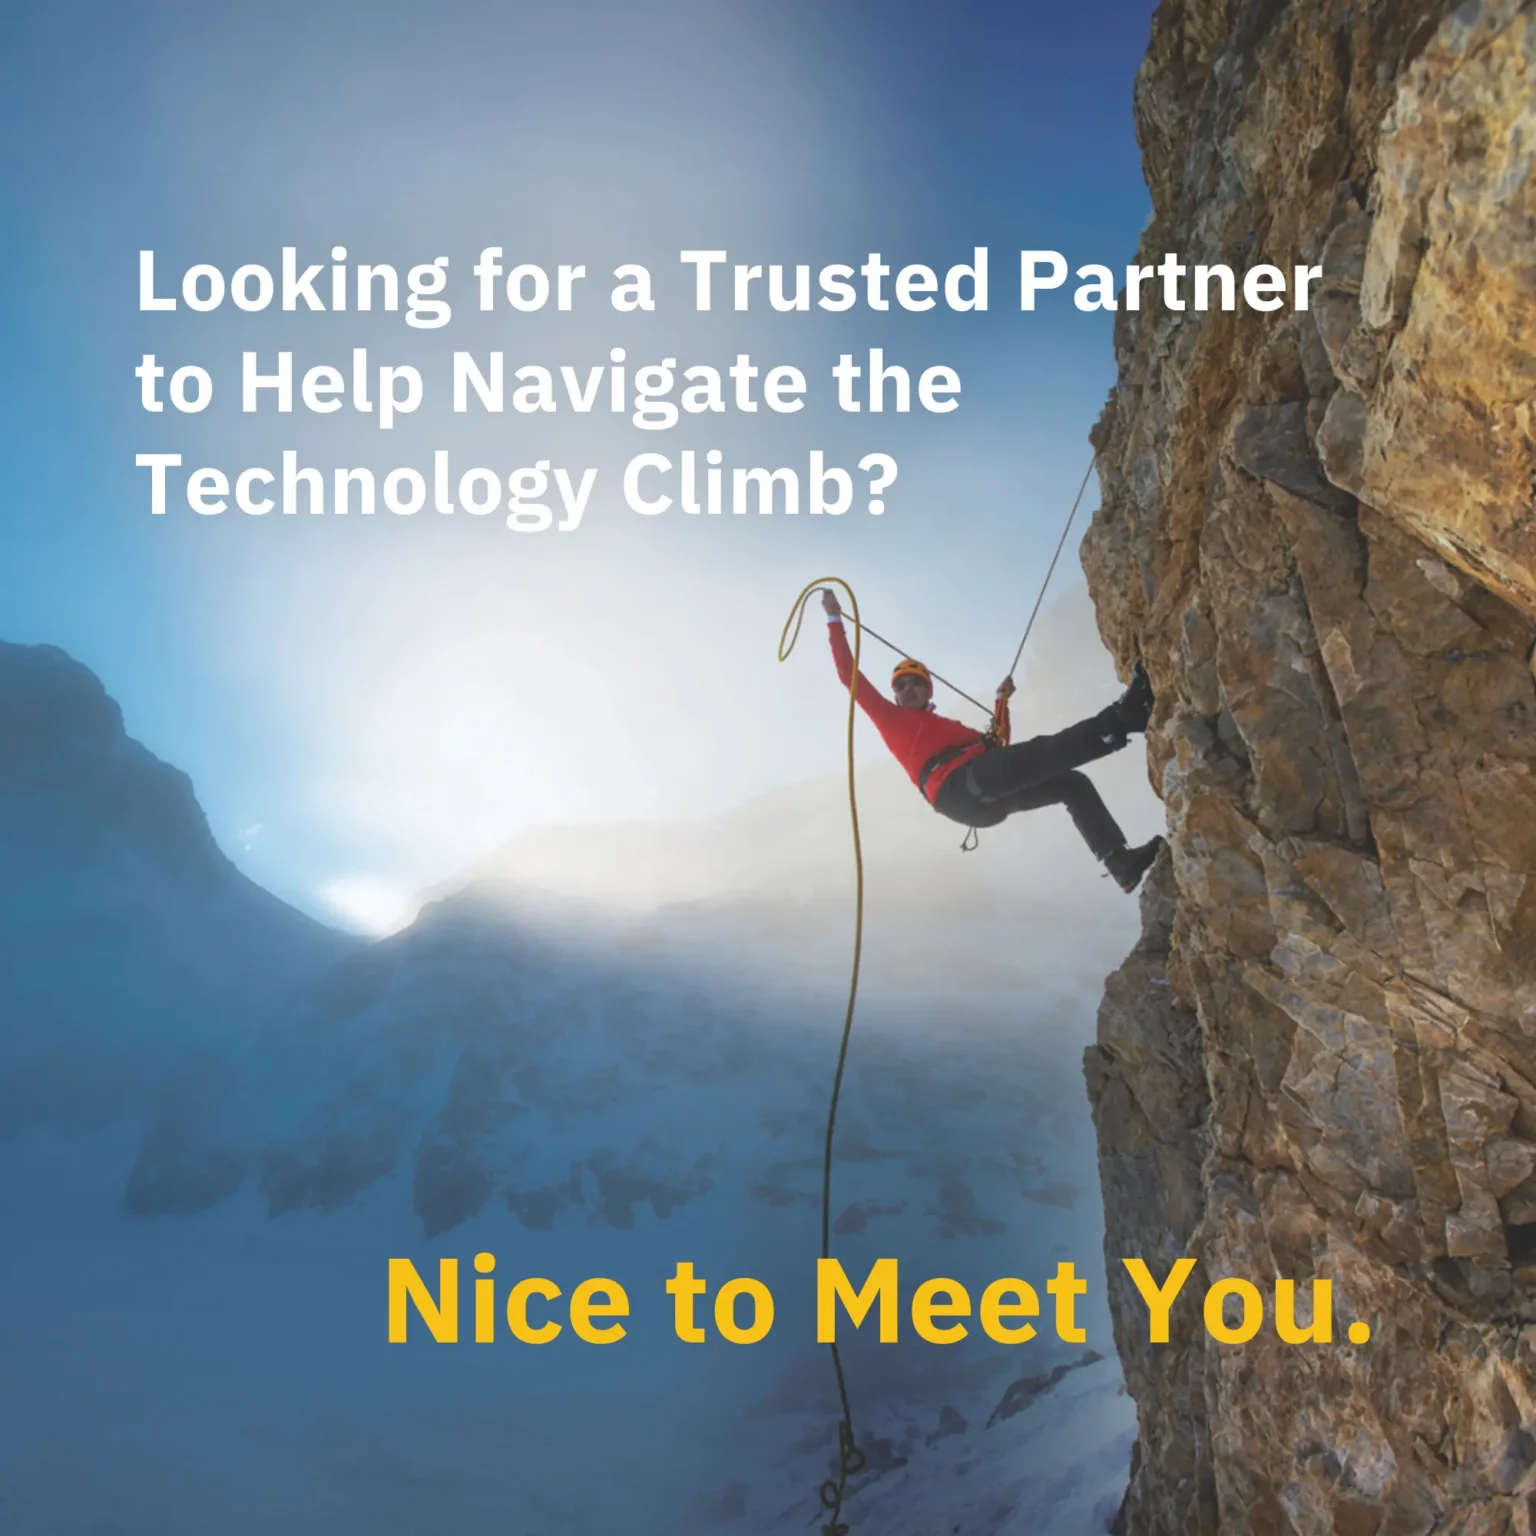 Managed IT and Cybersecurity Services Company in New York Brochure technology partner